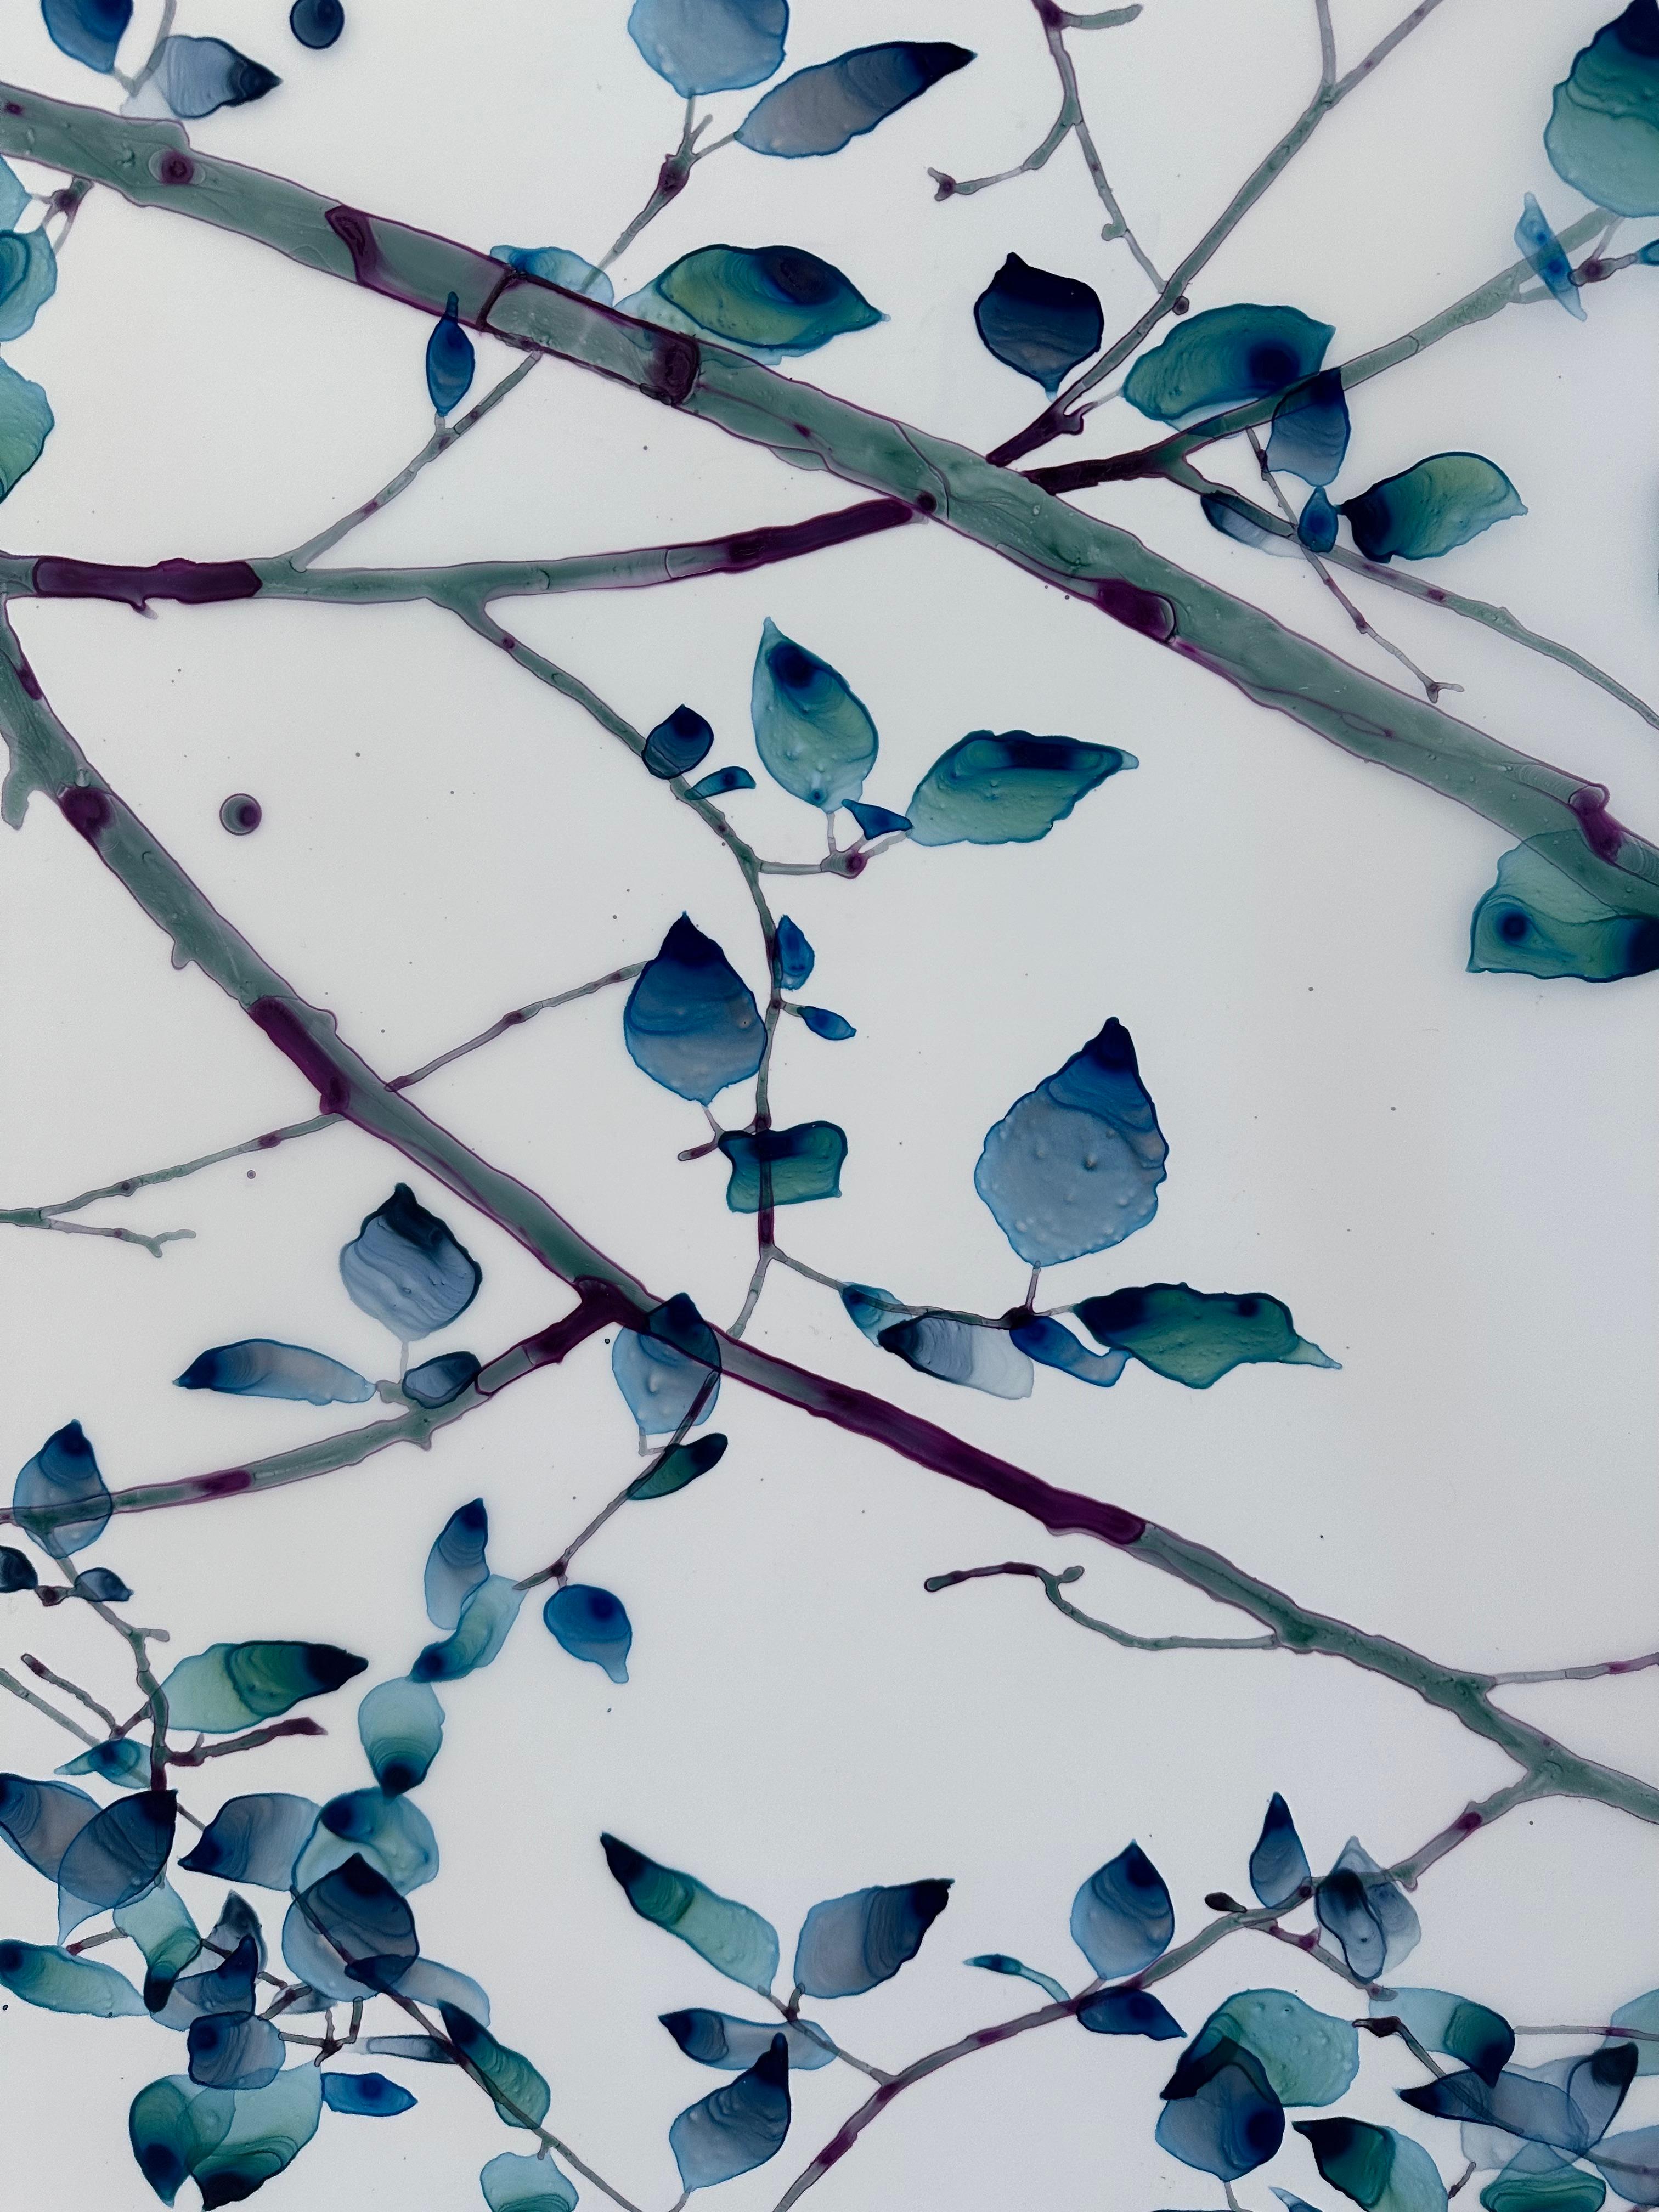 Layers of foliage in shades of teal blue and dark violet with little clusters of bright pink flowers grace grayish violet branches on the pristine white background of this horizontal painting in acrylic on Mylar.

Battenfield's works on Mylar